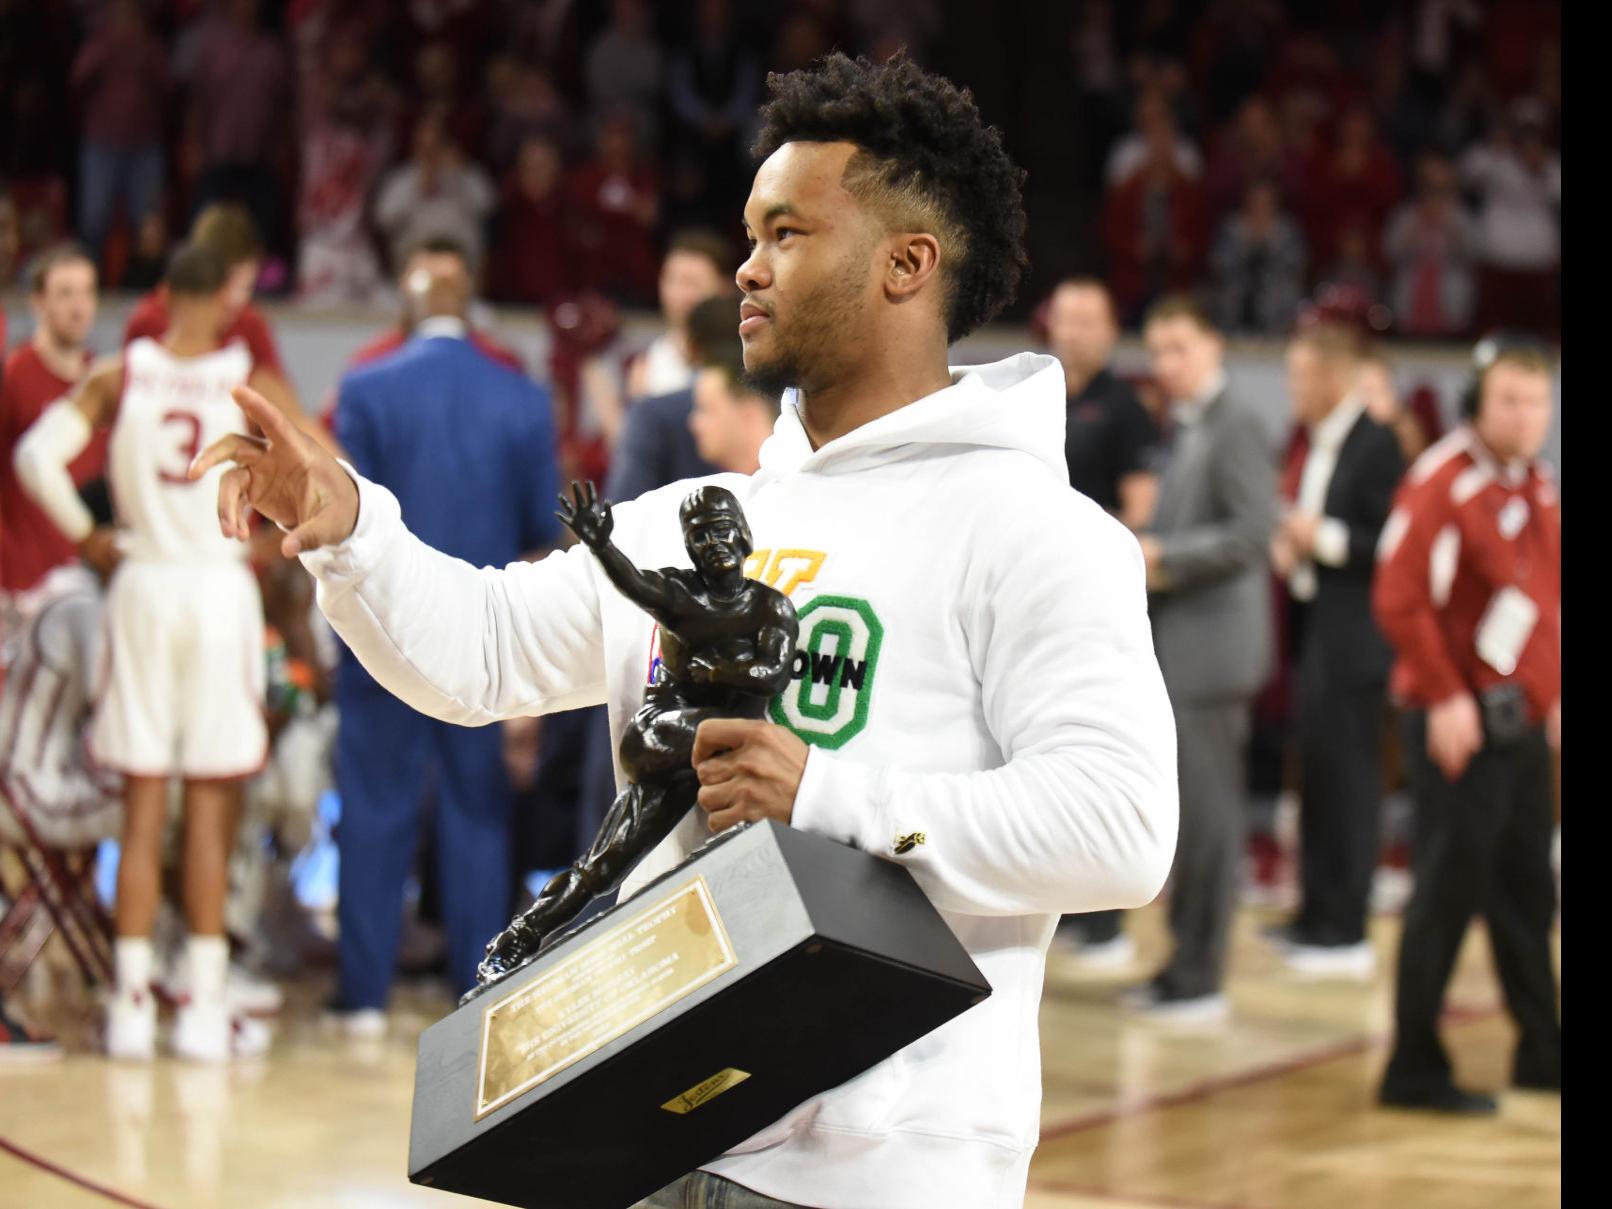 OU football: Kyler Murray united with Kliff Kingsbury after being selected  No. 1 overall in NFL Draft, Oklahoma